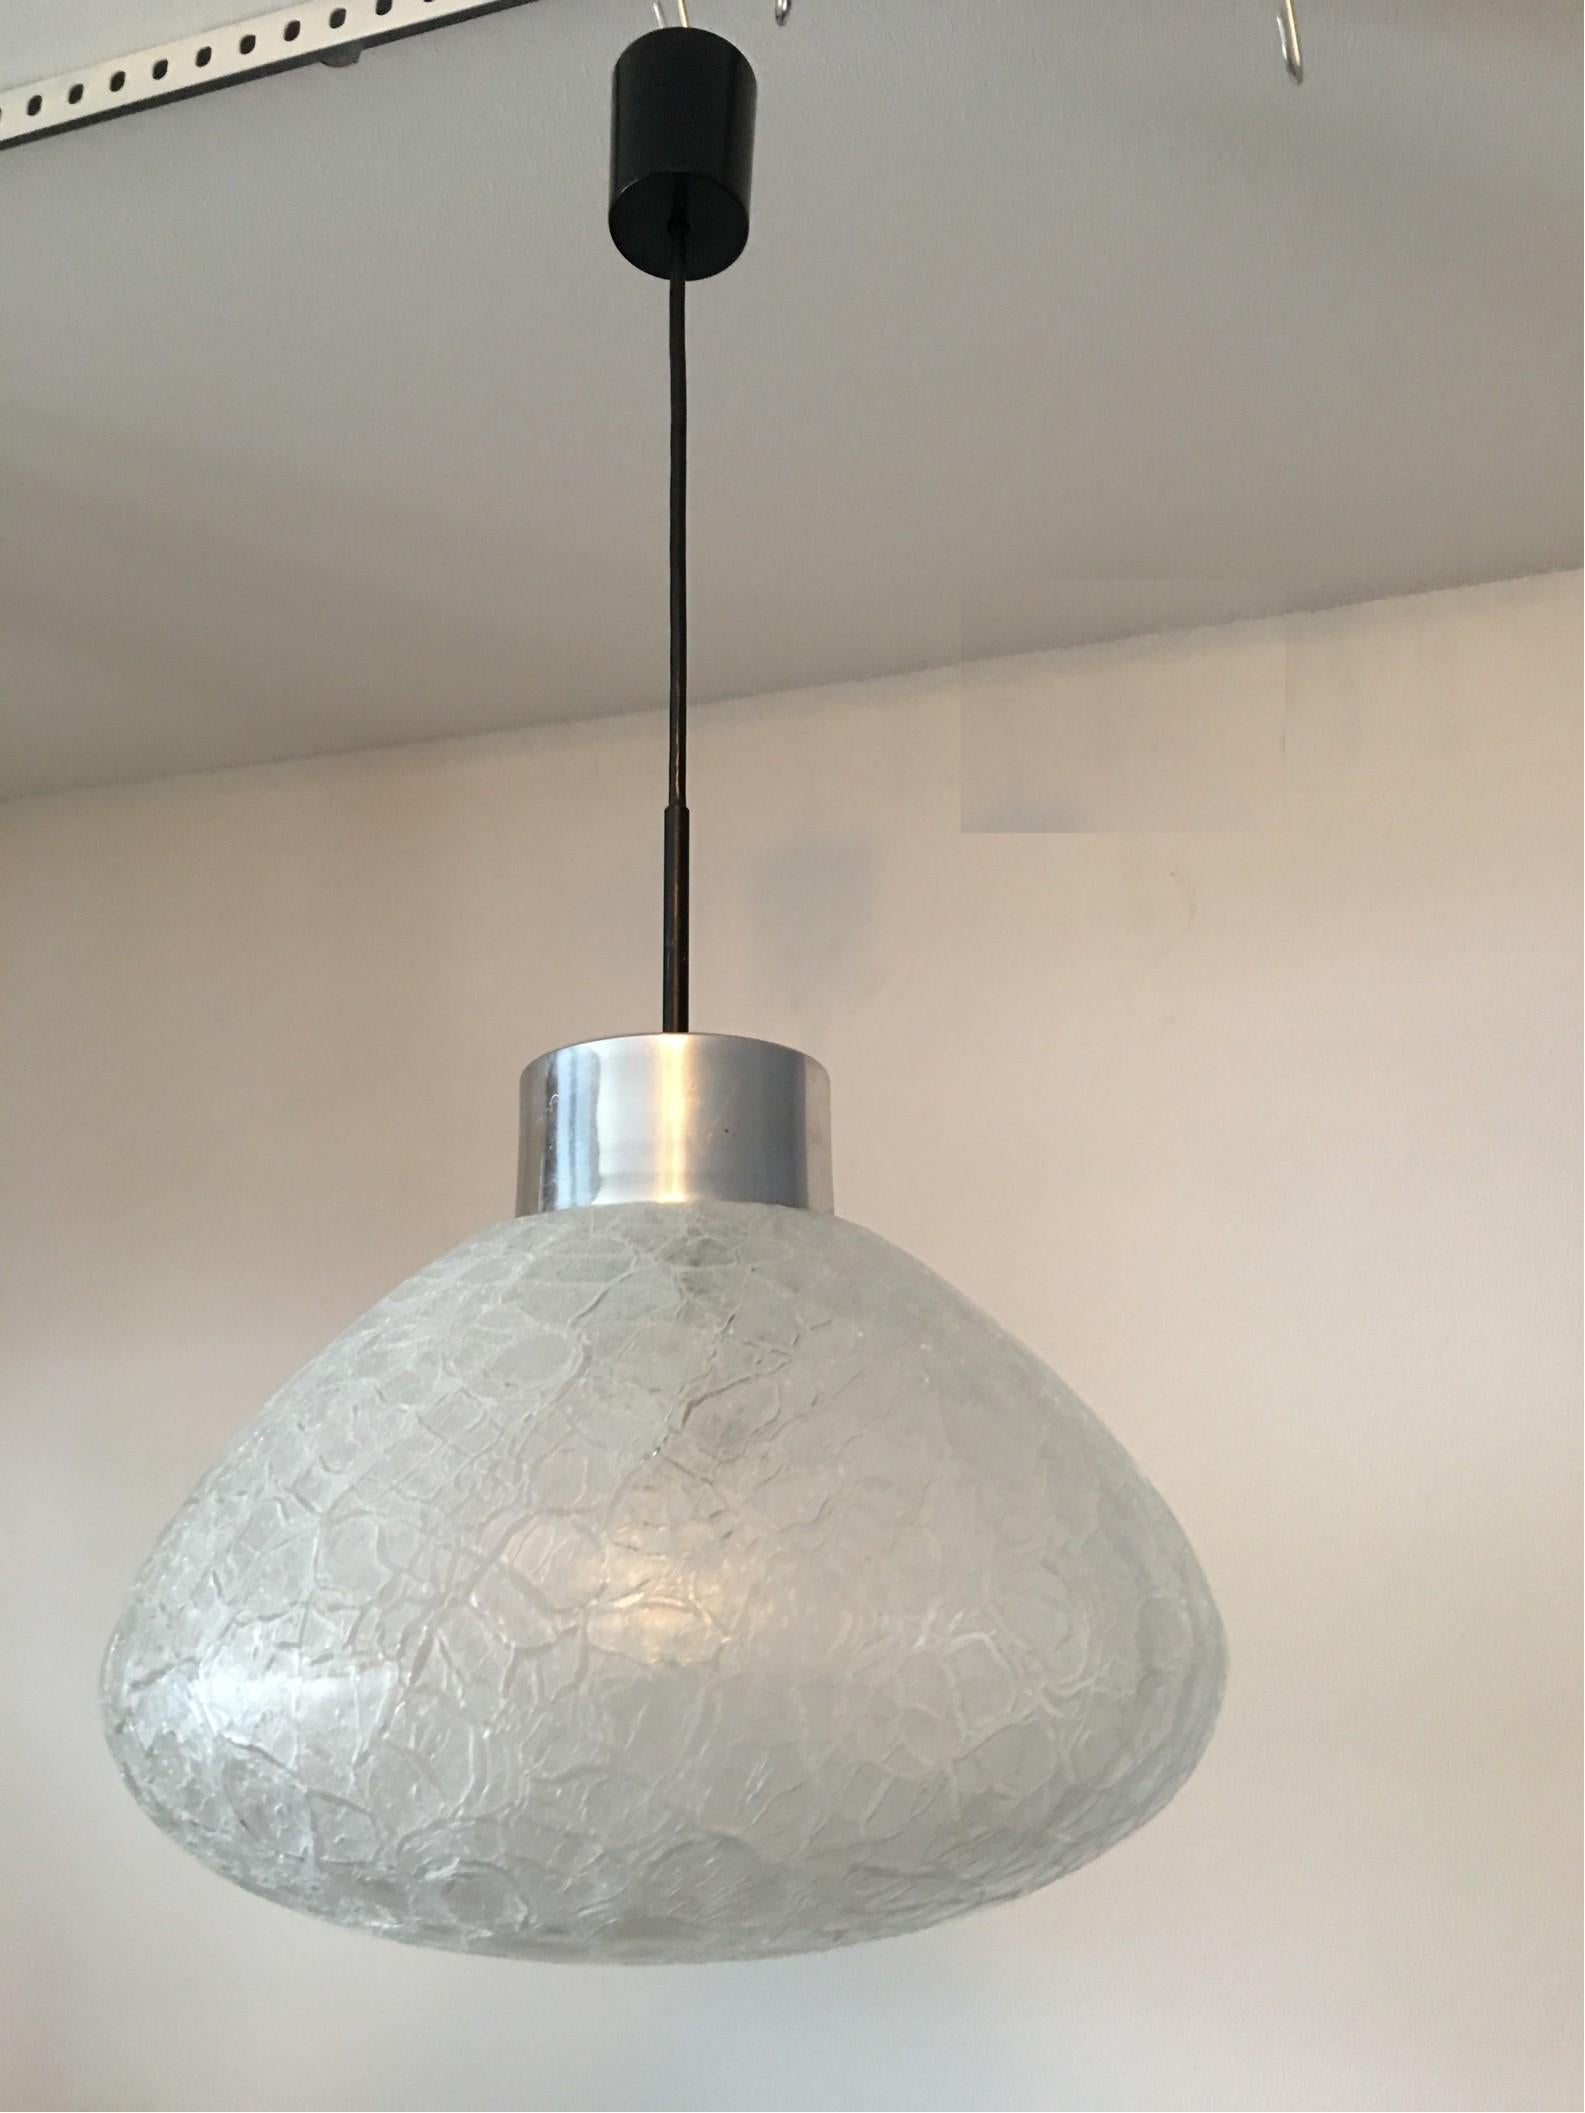 Aluminum 1960s Doria Textured Glass Drop Pendant Chandelier from Germany For Sale